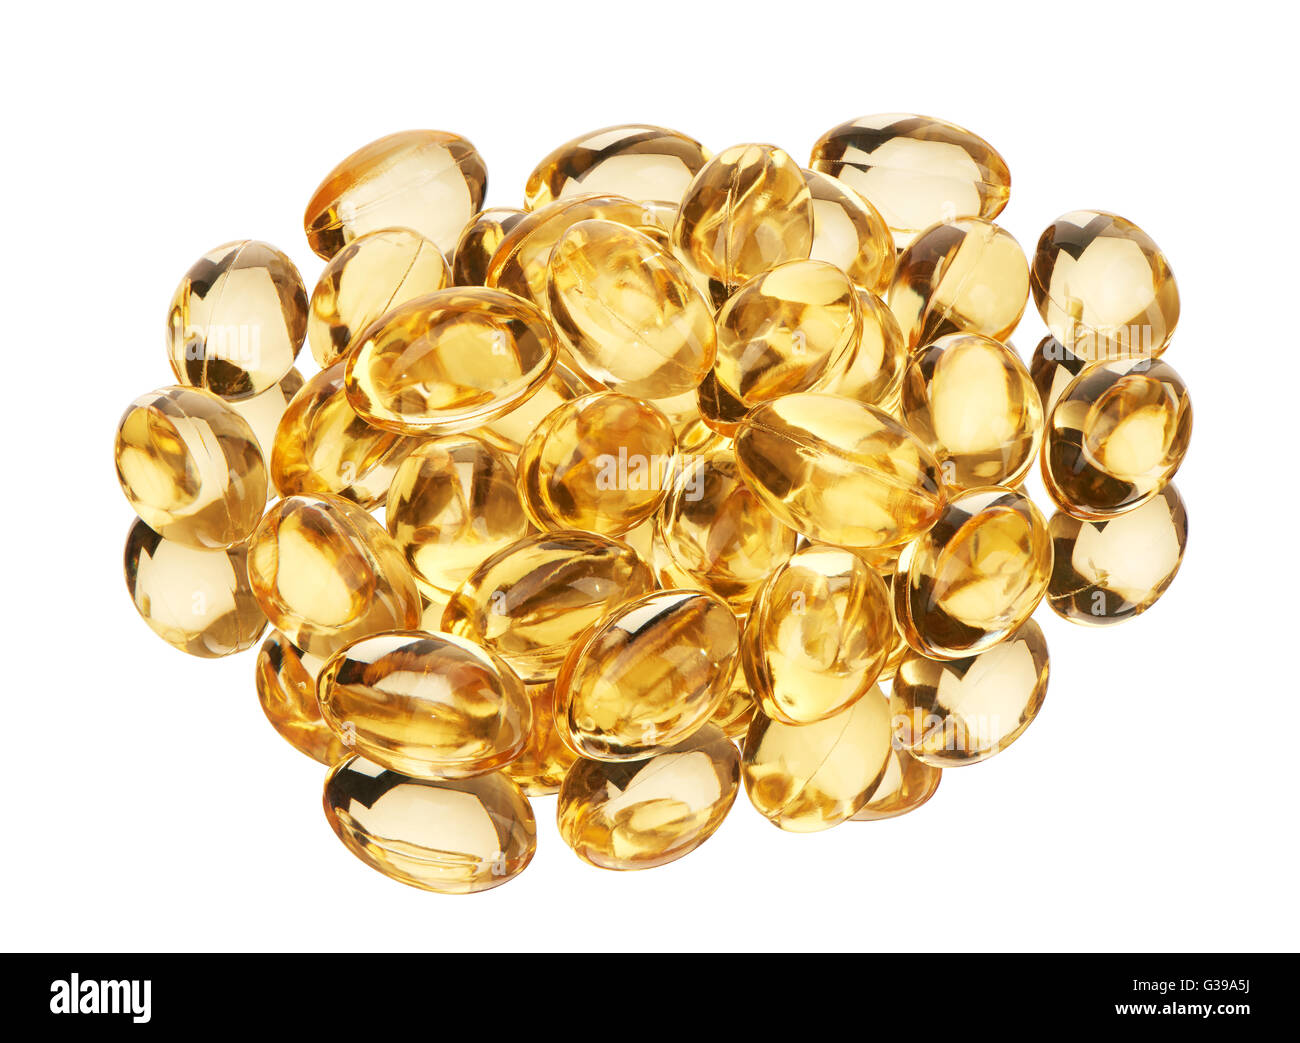 Pile of soft gel capsules with golden color oil supplements isolated on white background. Clipping path included. Stock Photo